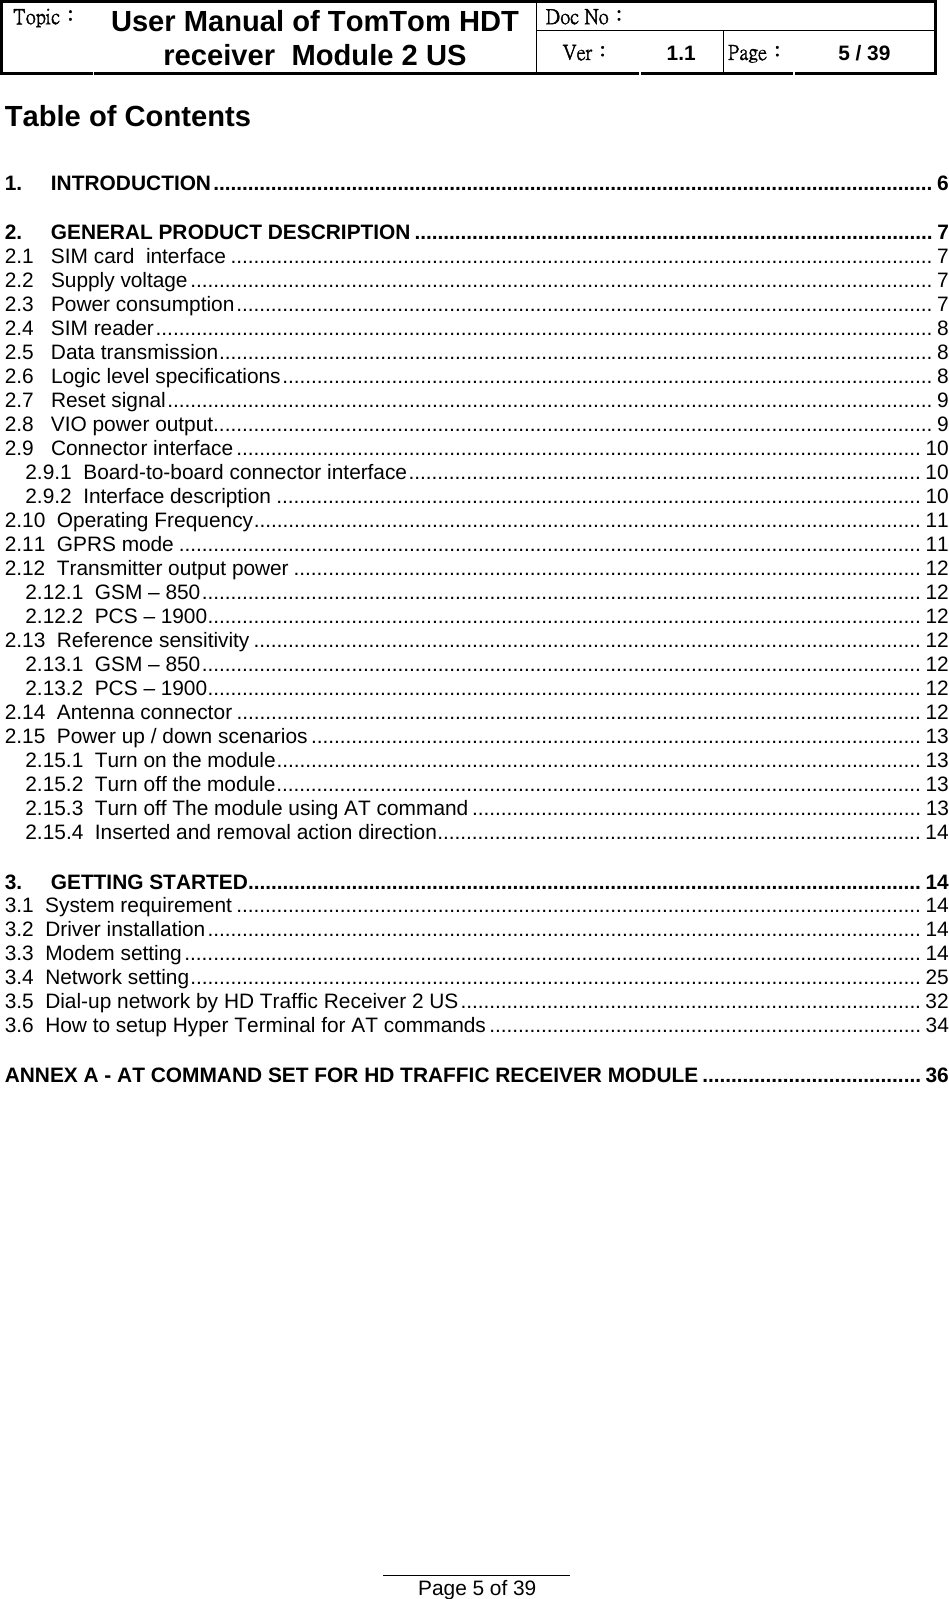 Doc No：  Topic：  User Manual of TomTom HDT receiver  Module 2 US  Ver：  1.1  Page：  5 / 39  Page 5 of 39  Table of Contents 1.     INTRODUCTION............................................................................................................................. 6 2.     GENERAL PRODUCT DESCRIPTION .......................................................................................... 7 2.1   SIM card  interface .......................................................................................................................... 7 2.2   Supply voltage................................................................................................................................. 7 2.3   Power consumption......................................................................................................................... 7 2.4   SIM reader....................................................................................................................................... 8 2.5   Data transmission............................................................................................................................ 8 2.6   Logic level specifications................................................................................................................. 8 2.7   Reset signal..................................................................................................................................... 9 2.8   VIO power output............................................................................................................................. 9 2.9   Connector interface....................................................................................................................... 10 2.9.1  Board-to-board connector interface......................................................................................... 10 2.9.2  Interface description ................................................................................................................ 10 2.10  Operating Frequency.................................................................................................................... 11 2.11  GPRS mode ................................................................................................................................. 11 2.12  Transmitter output power ............................................................................................................. 12 2.12.1  GSM – 850............................................................................................................................. 12 2.12.2  PCS – 1900............................................................................................................................ 12 2.13  Reference sensitivity .................................................................................................................... 12 2.13.1  GSM – 850............................................................................................................................. 12 2.13.2  PCS – 1900............................................................................................................................ 12 2.14  Antenna connector ....................................................................................................................... 12 2.15  Power up / down scenarios .......................................................................................................... 13 2.15.1  Turn on the module................................................................................................................ 13 2.15.2  Turn off the module................................................................................................................ 13 2.15.3  Turn off The module using AT command .............................................................................. 13 2.15.4  Inserted and removal action direction.................................................................................... 14 3.     GETTING STARTED..................................................................................................................... 14 3.1  System requirement ....................................................................................................................... 14 3.2  Driver installation............................................................................................................................ 14 3.3  Modem setting................................................................................................................................ 14 3.4  Network setting............................................................................................................................... 25 3.5  Dial-up network by HD Traffic Receiver 2 US................................................................................32 3.6  How to setup Hyper Terminal for AT commands ........................................................................... 34 ANNEX A - AT COMMAND SET FOR HD TRAFFIC RECEIVER MODULE ...................................... 36  